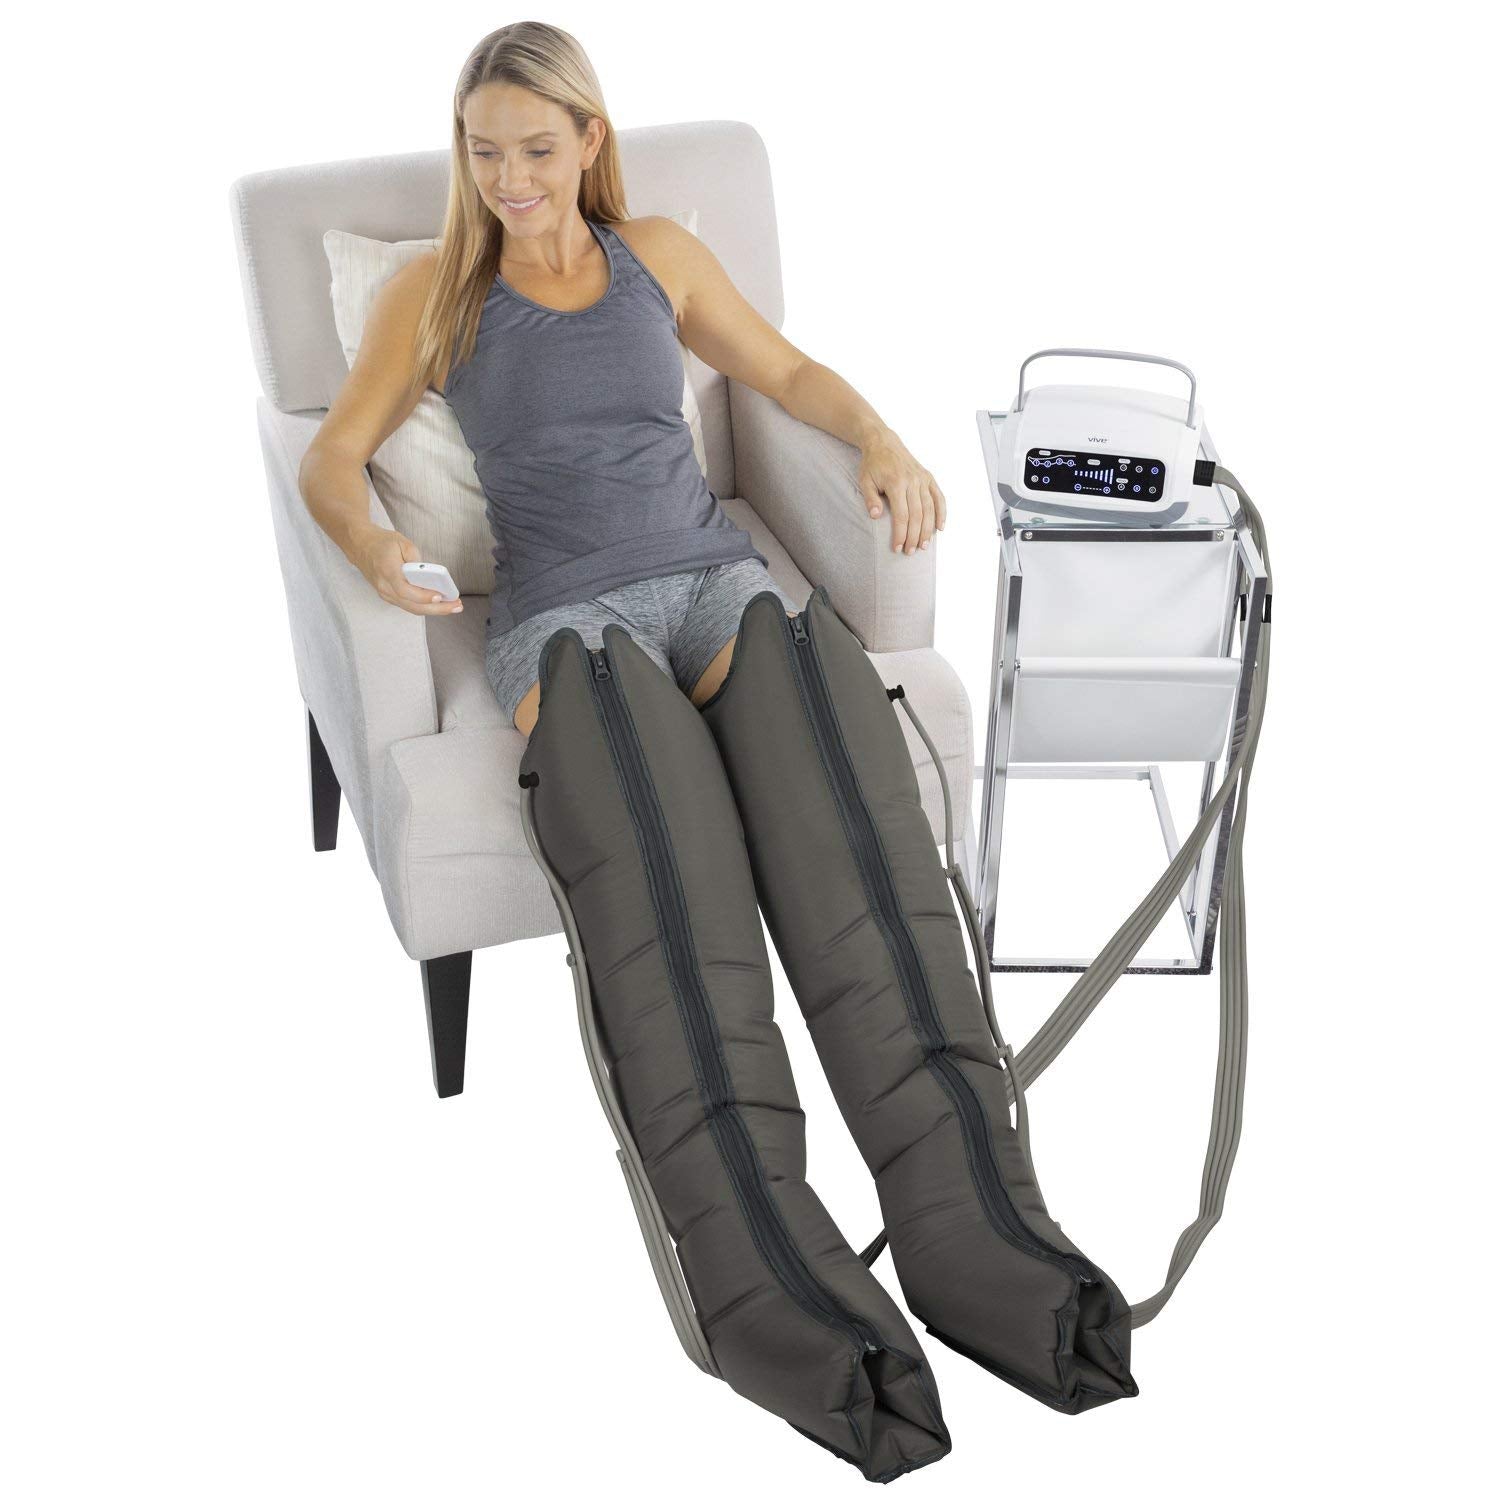 Sequential Compression Device - Leg Pump Machine for Lymphedema,  Circulation & Swelling - Intermittent Pneumatic SCD Air Therapy Recovery  with Full